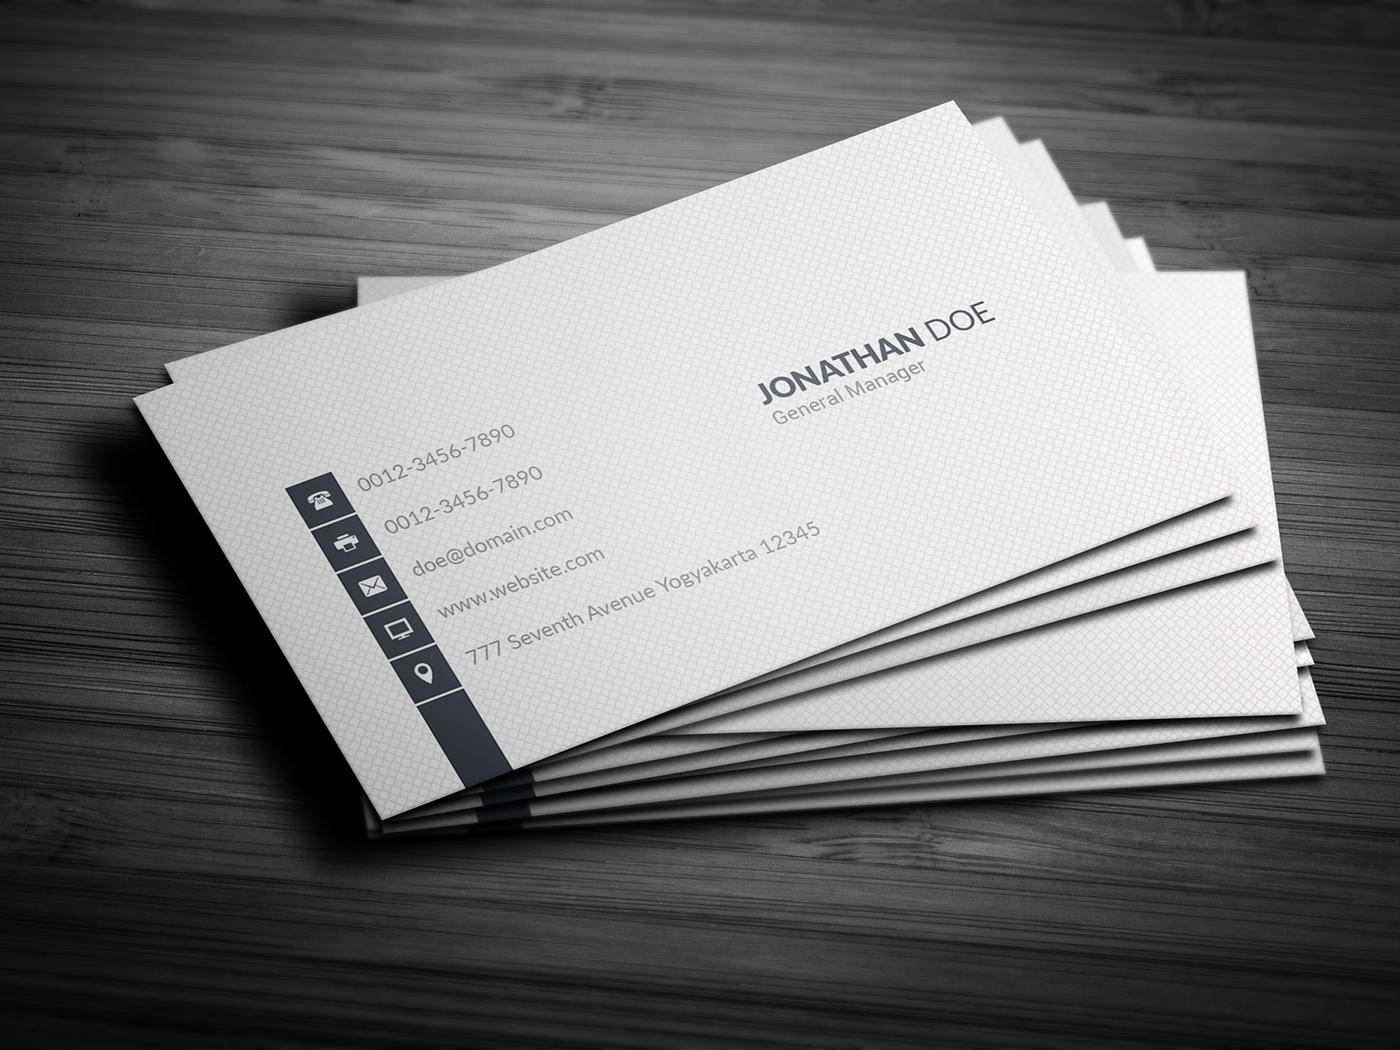 going under business cards 6